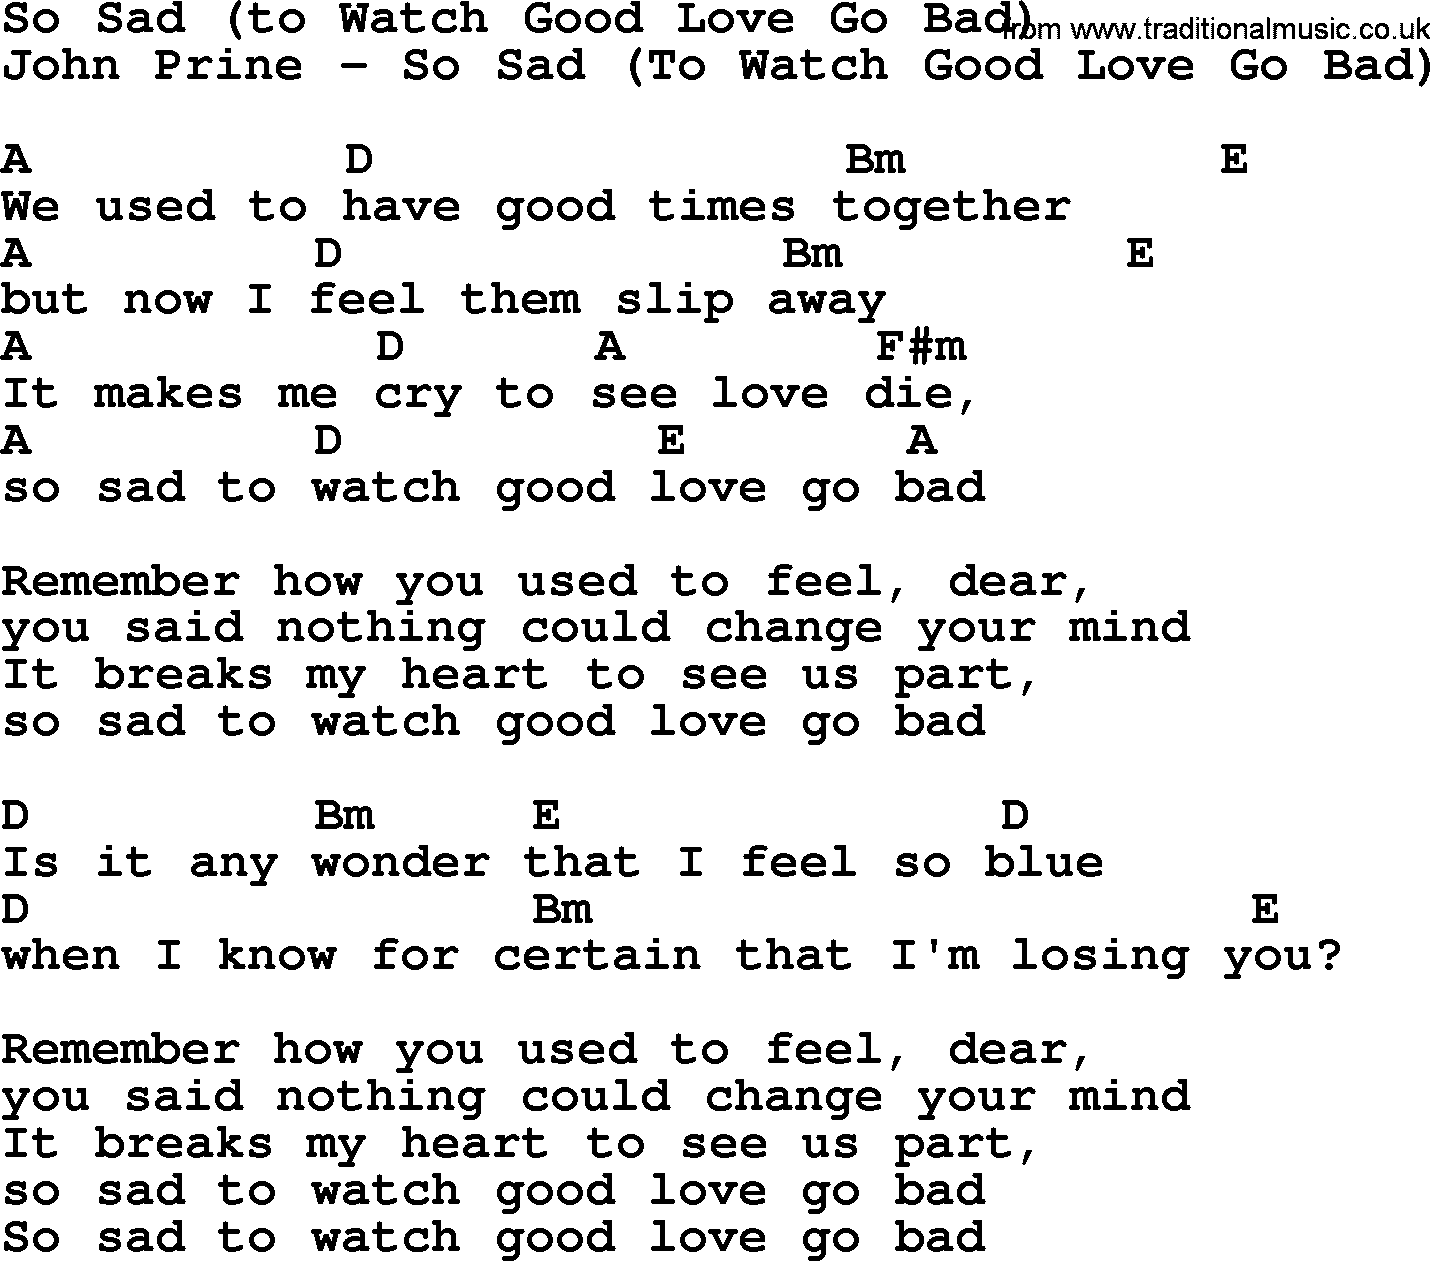 Bluegrass song: So Sad (To Watch Good Love Go Bad), lyrics and chords